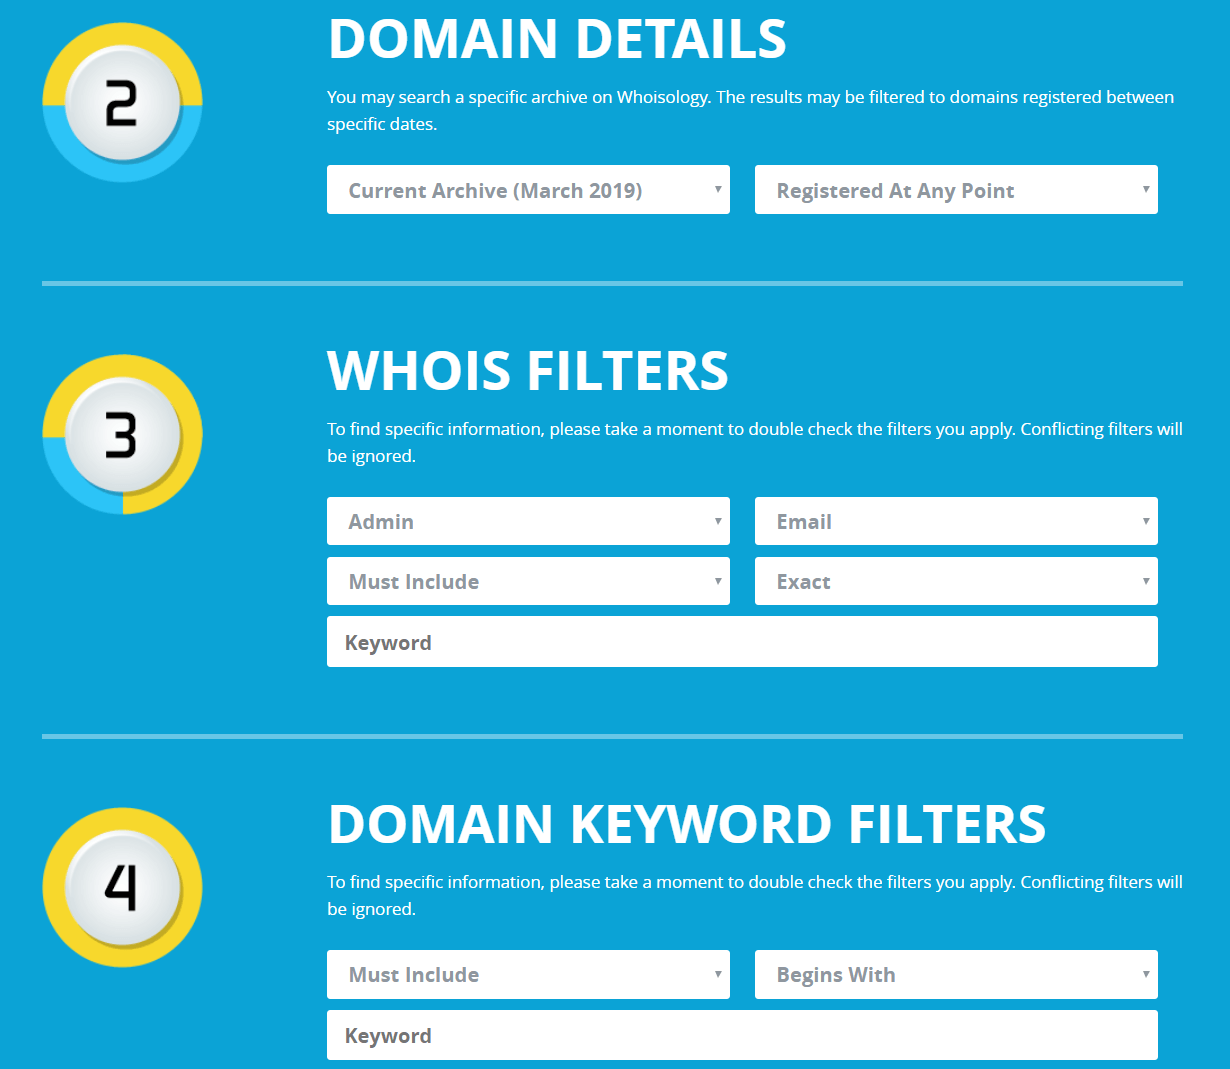 Advanced Search helps you use multiple filters together